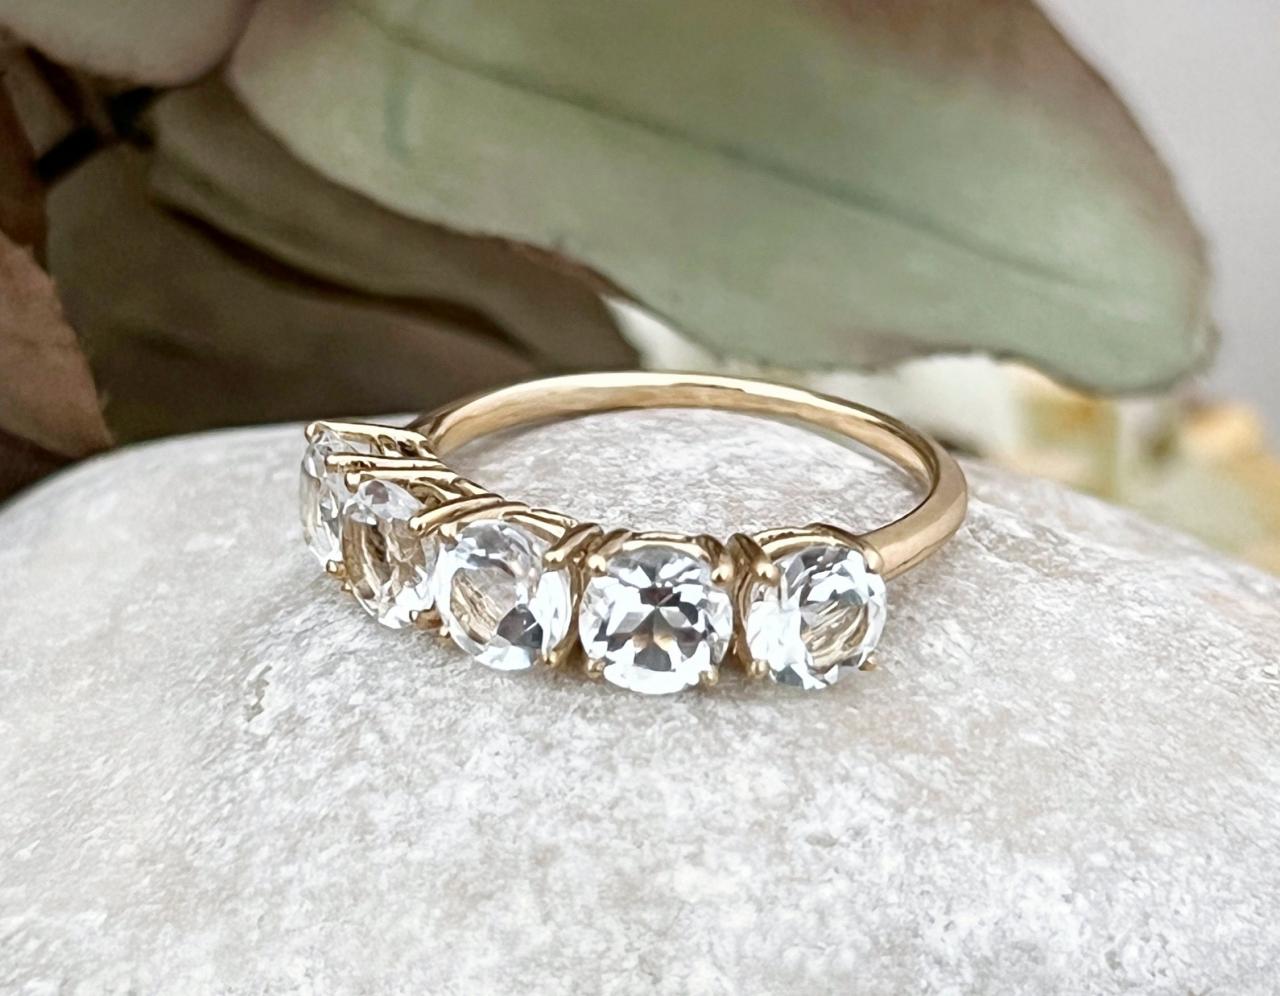 Solid gold engagement ring with white topaz, Natural gemstone wedding half band ring, 18k gold classic statement ring